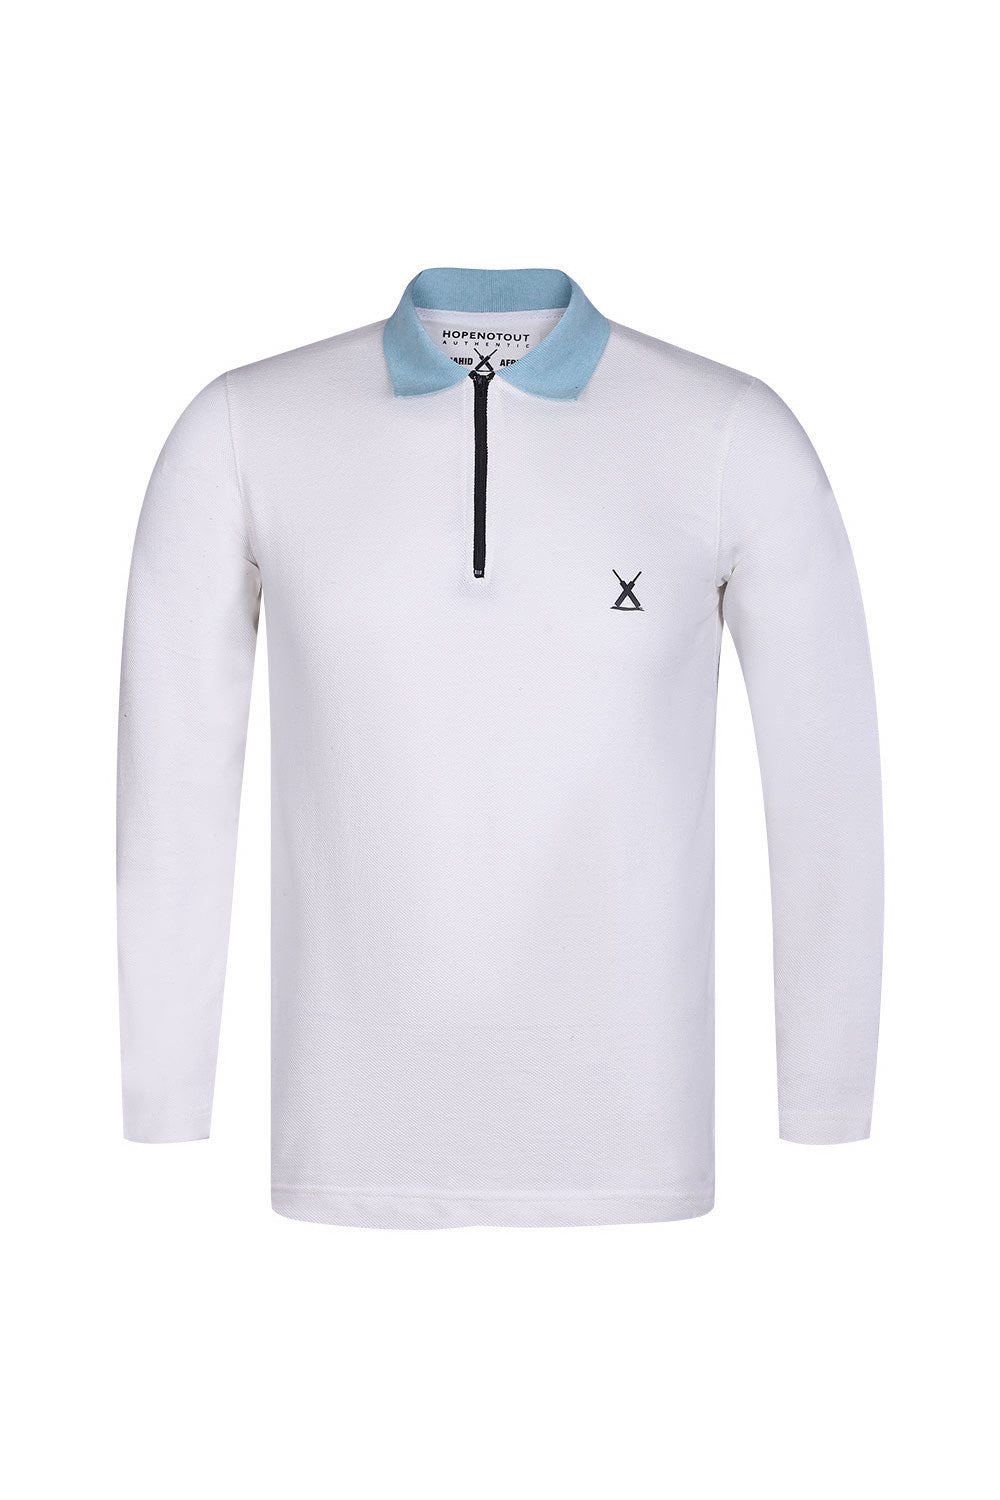 Zipper Polo with Contrast Collar - Polo Shirt - HOPE NOT OUT